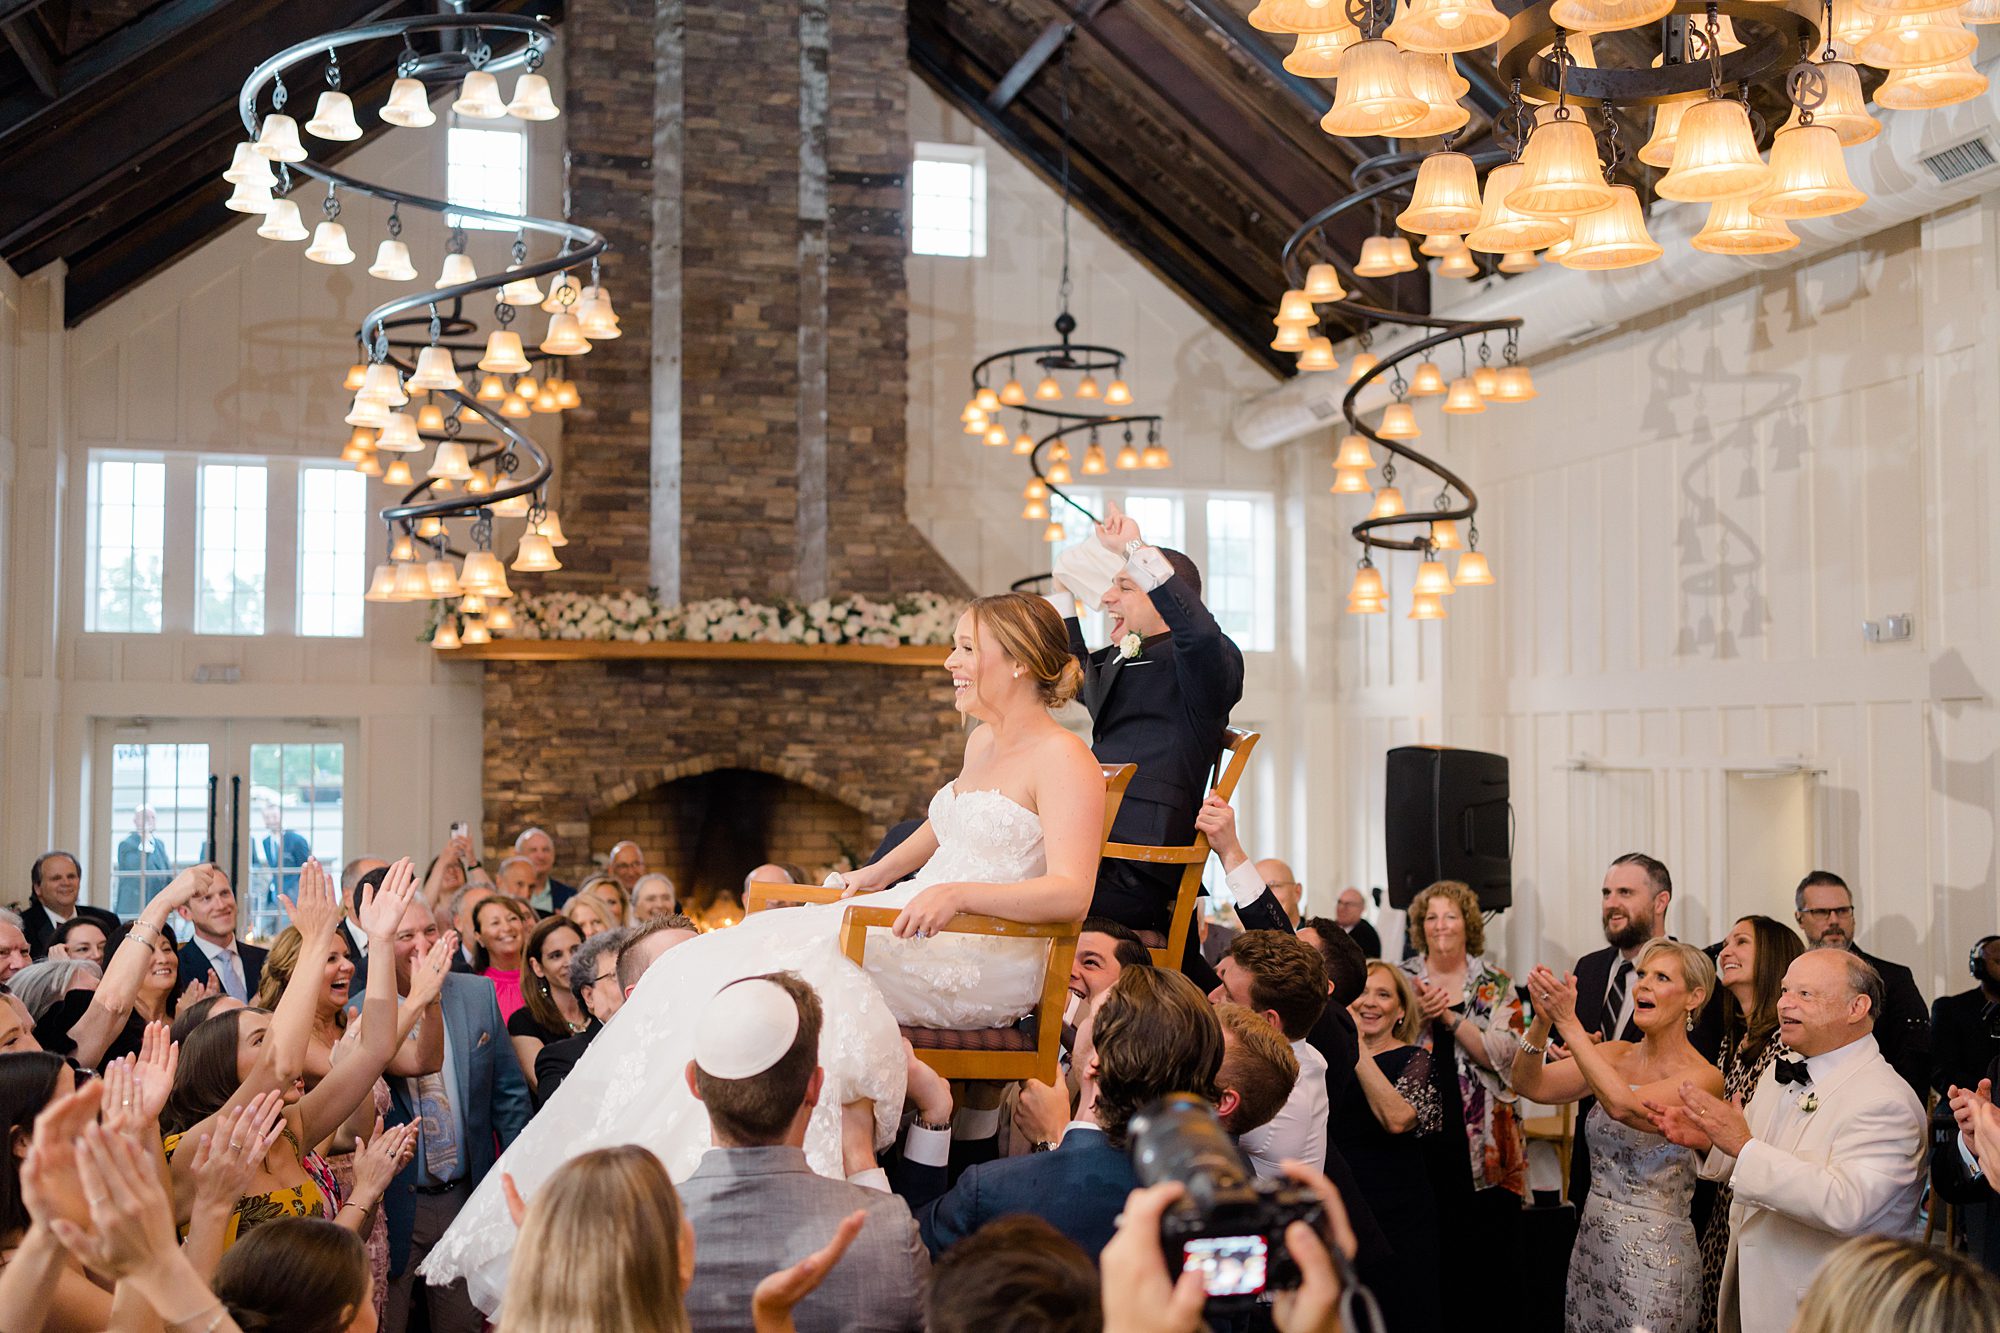 bride and groom are lifted up in the air on chairs during wedding reception